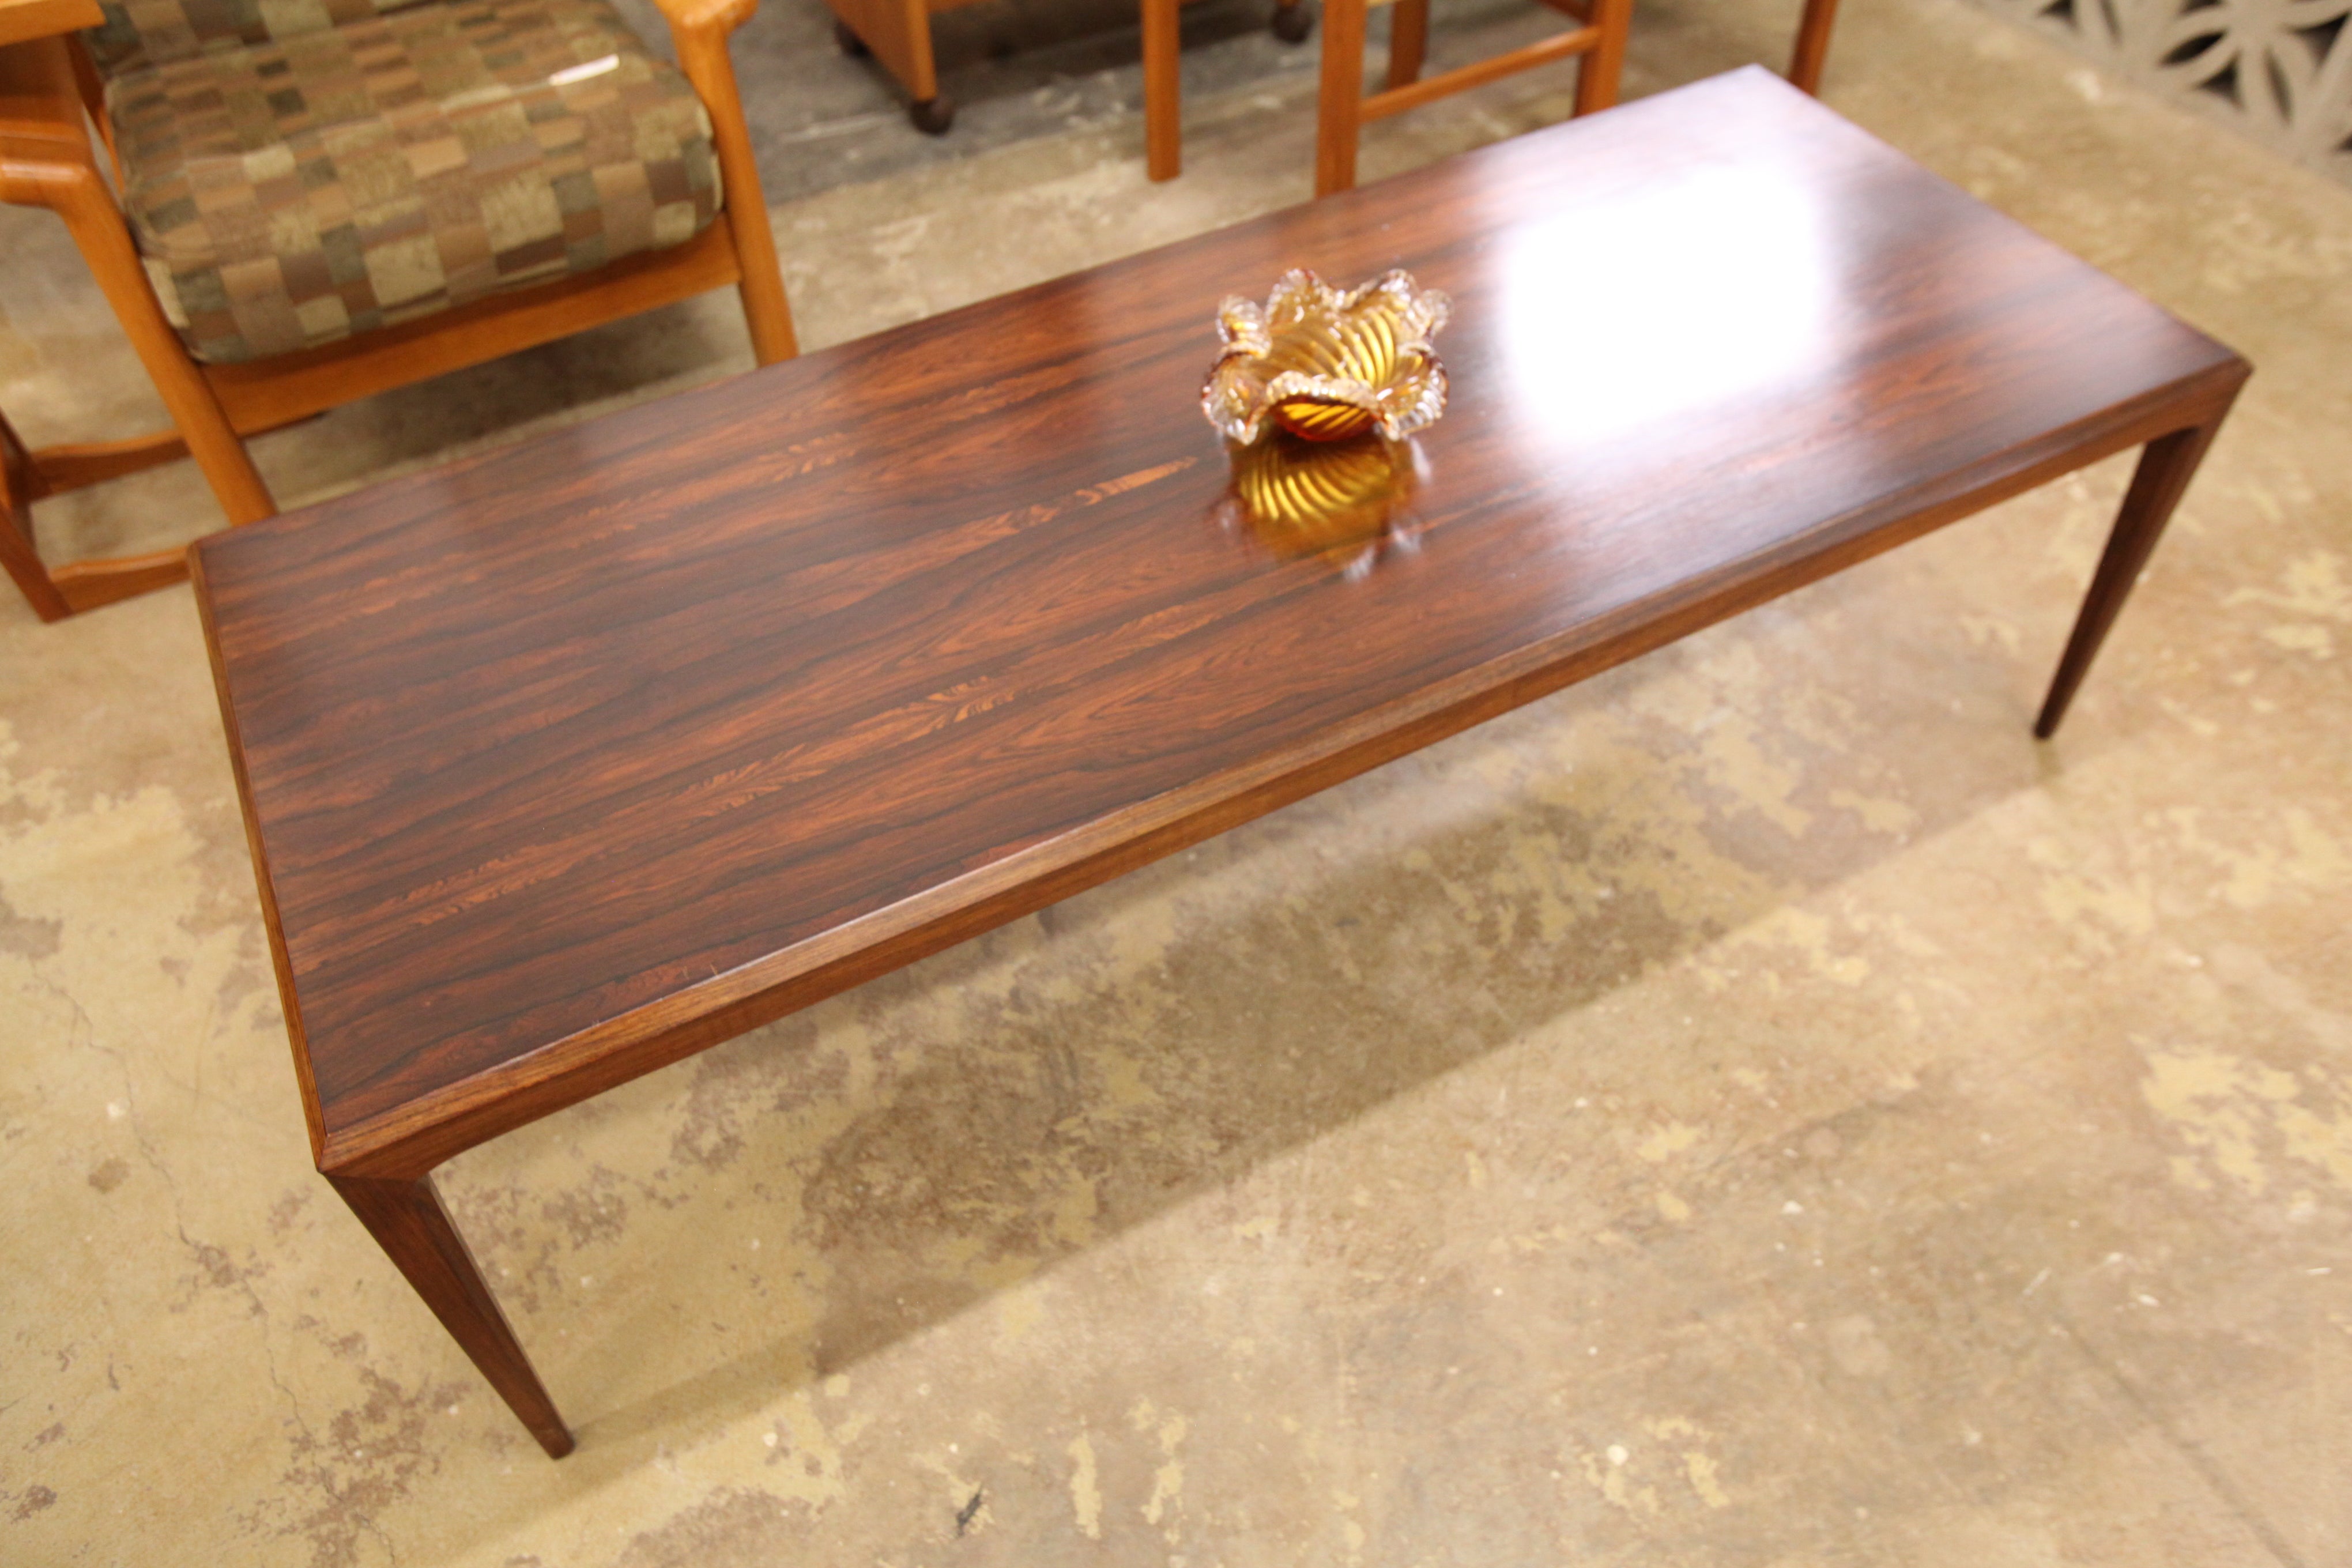 Vintage Large Rosewood Coffee Table (59" x 23.75" x 17.5"H)